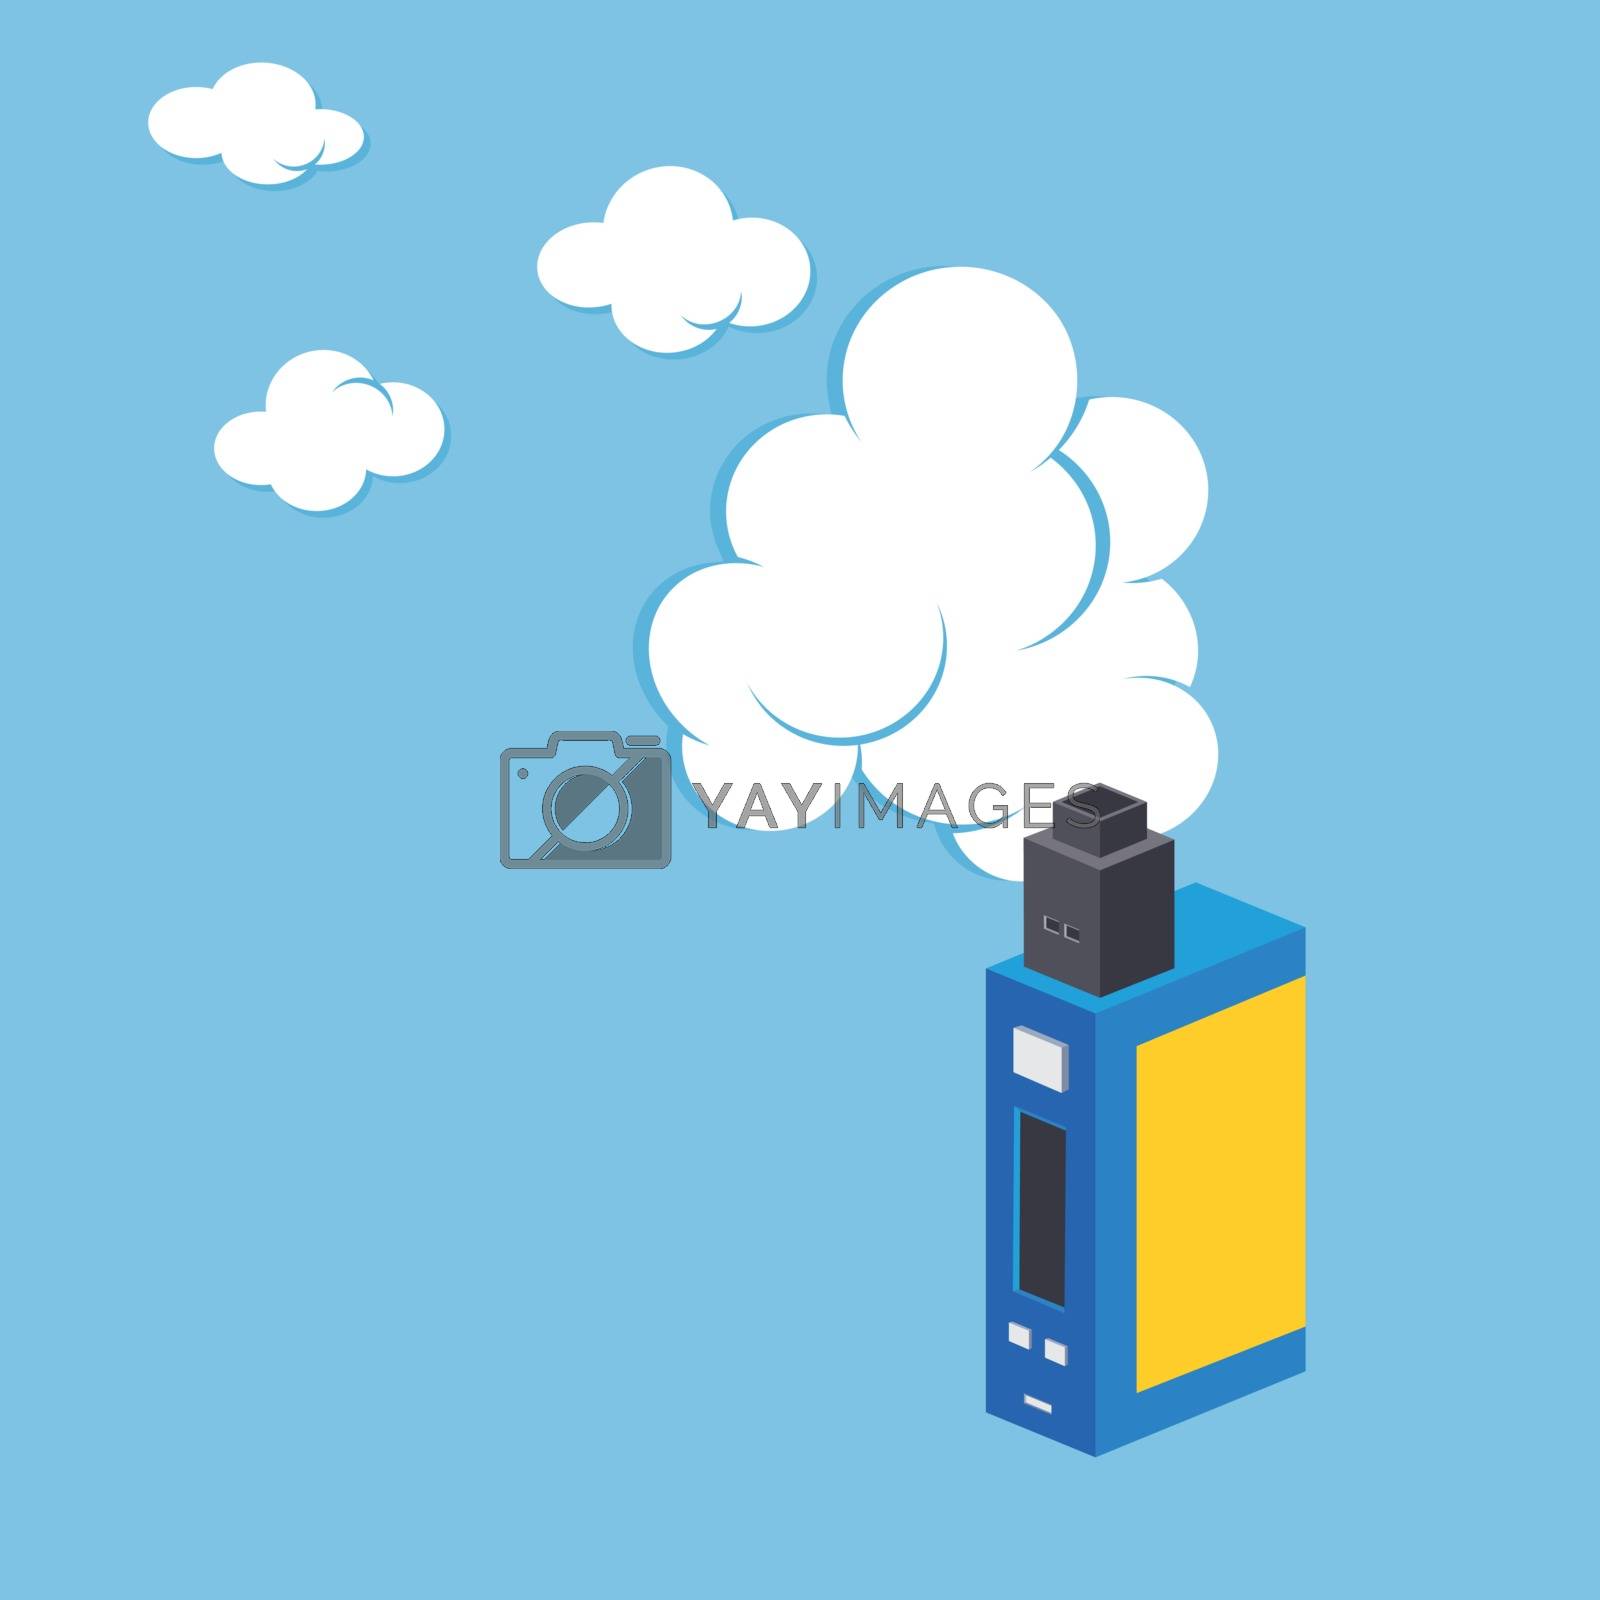 Royalty free image of isometric block electric cigarette personal vaporizer by vector1st